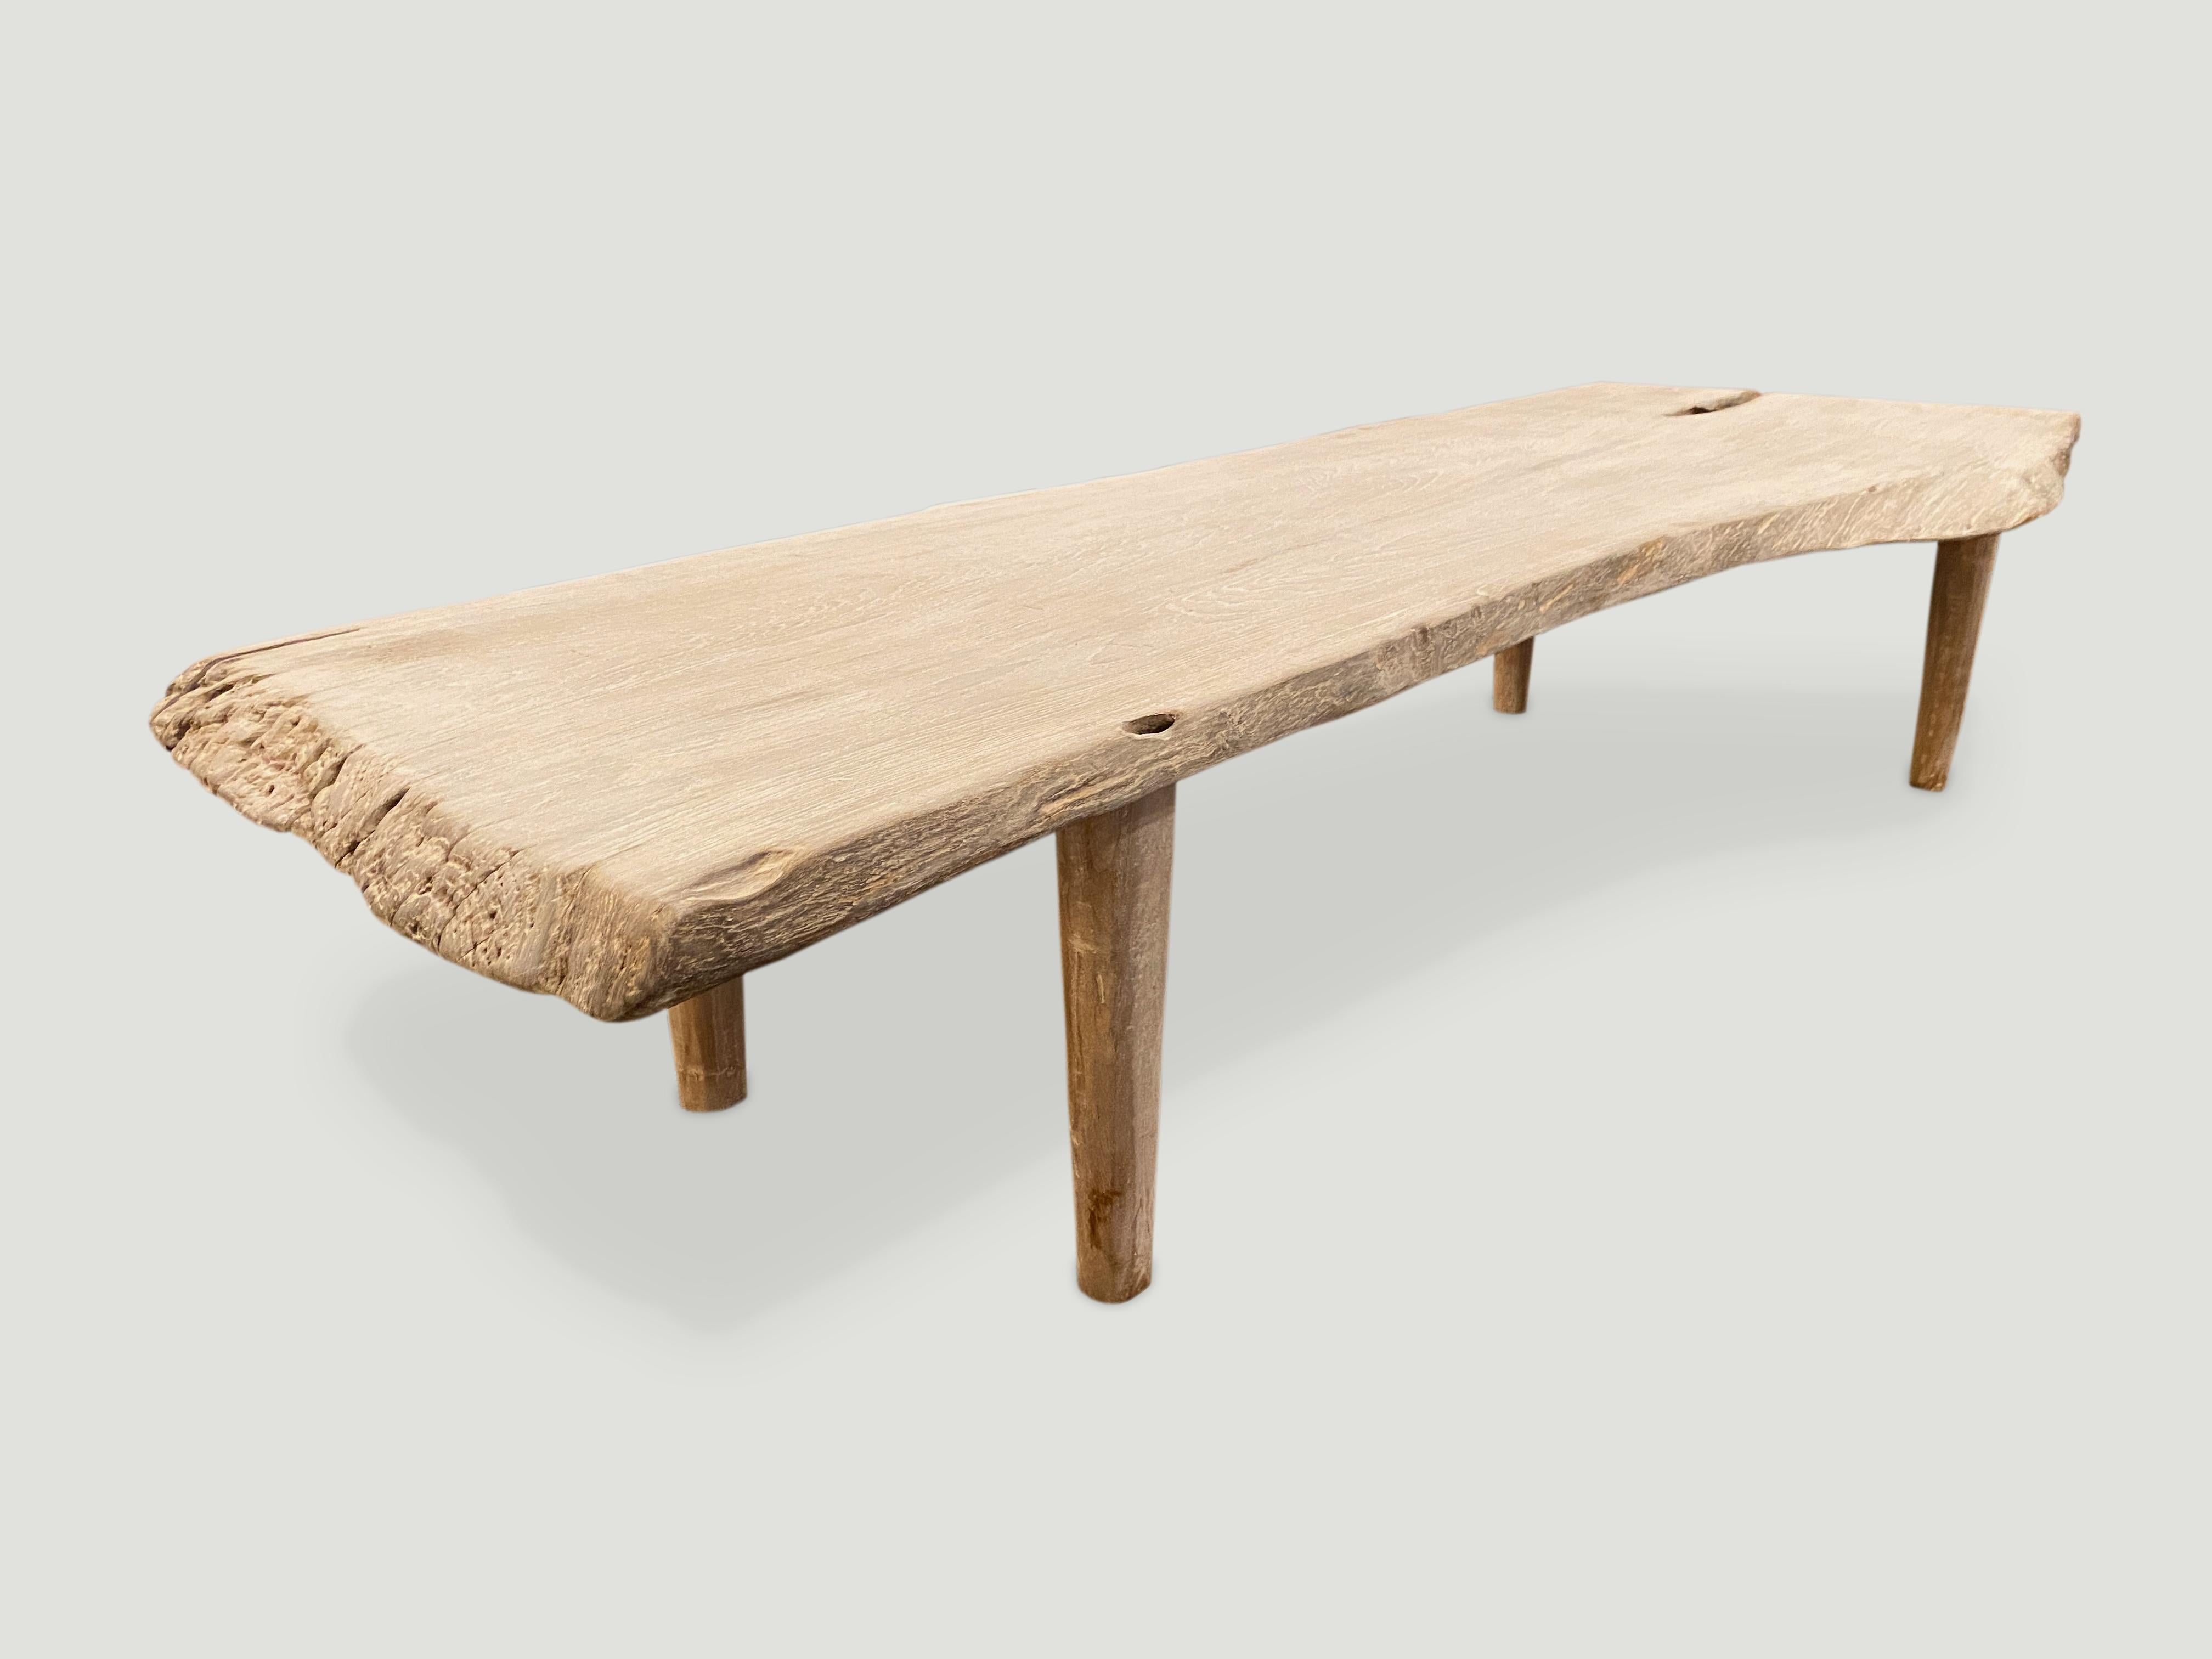 Stunning single slab, live edge teak coffee table or bench. We have added a light white wash finish, still exposing the beautiful grain of this reclaimed teak slab and Minimalist legs. Perfect for inside or outside living. Width extends from 22-30